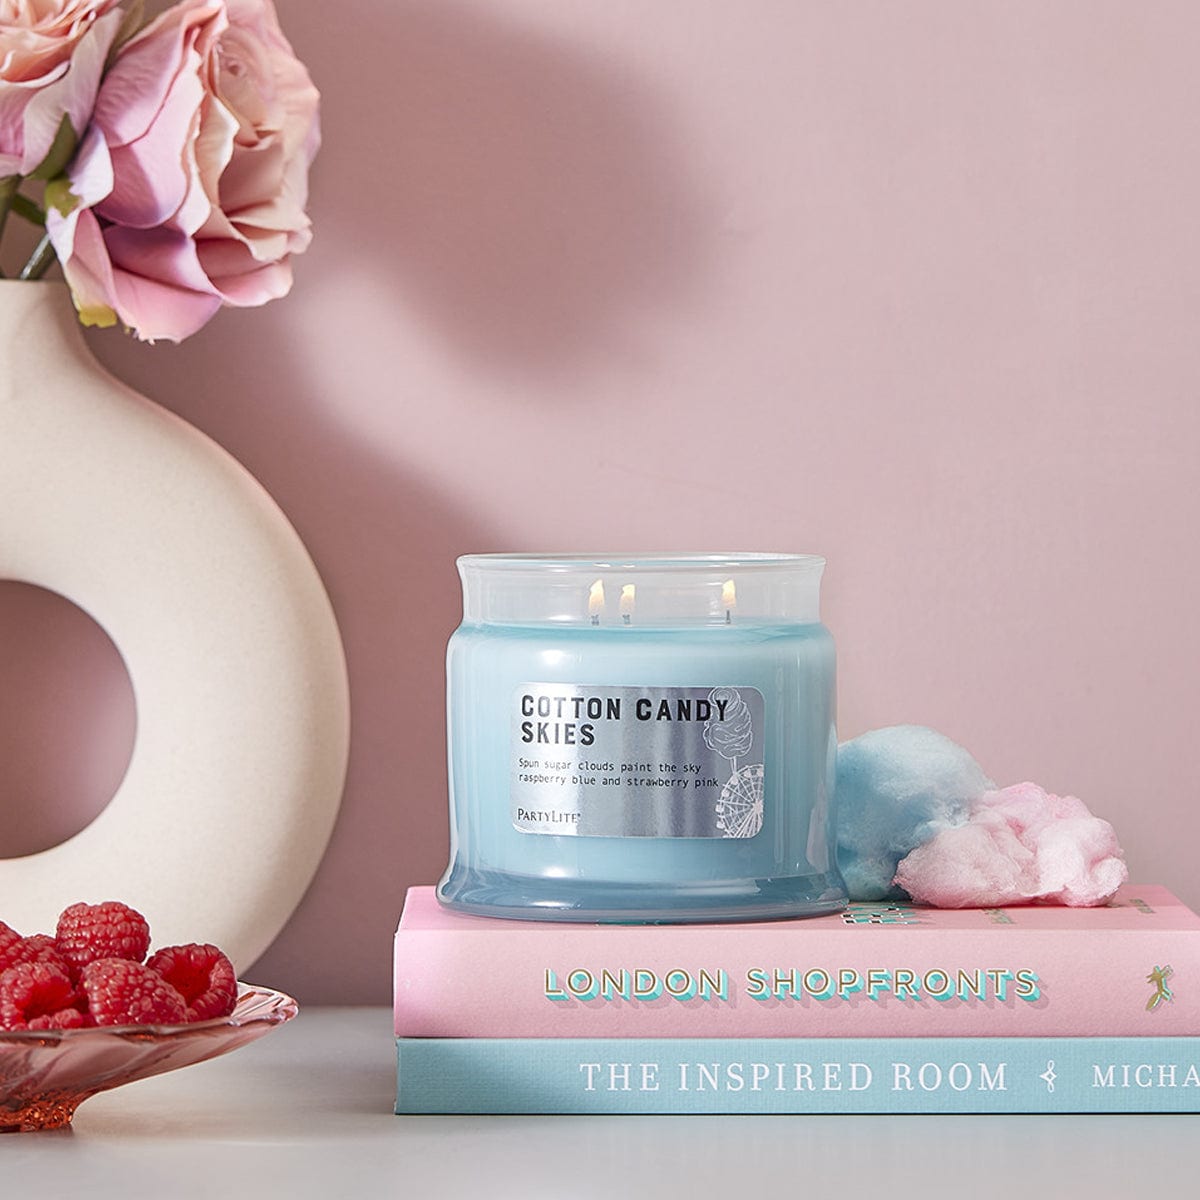 Cotton Candy Skies 3-Wick Jar Candle